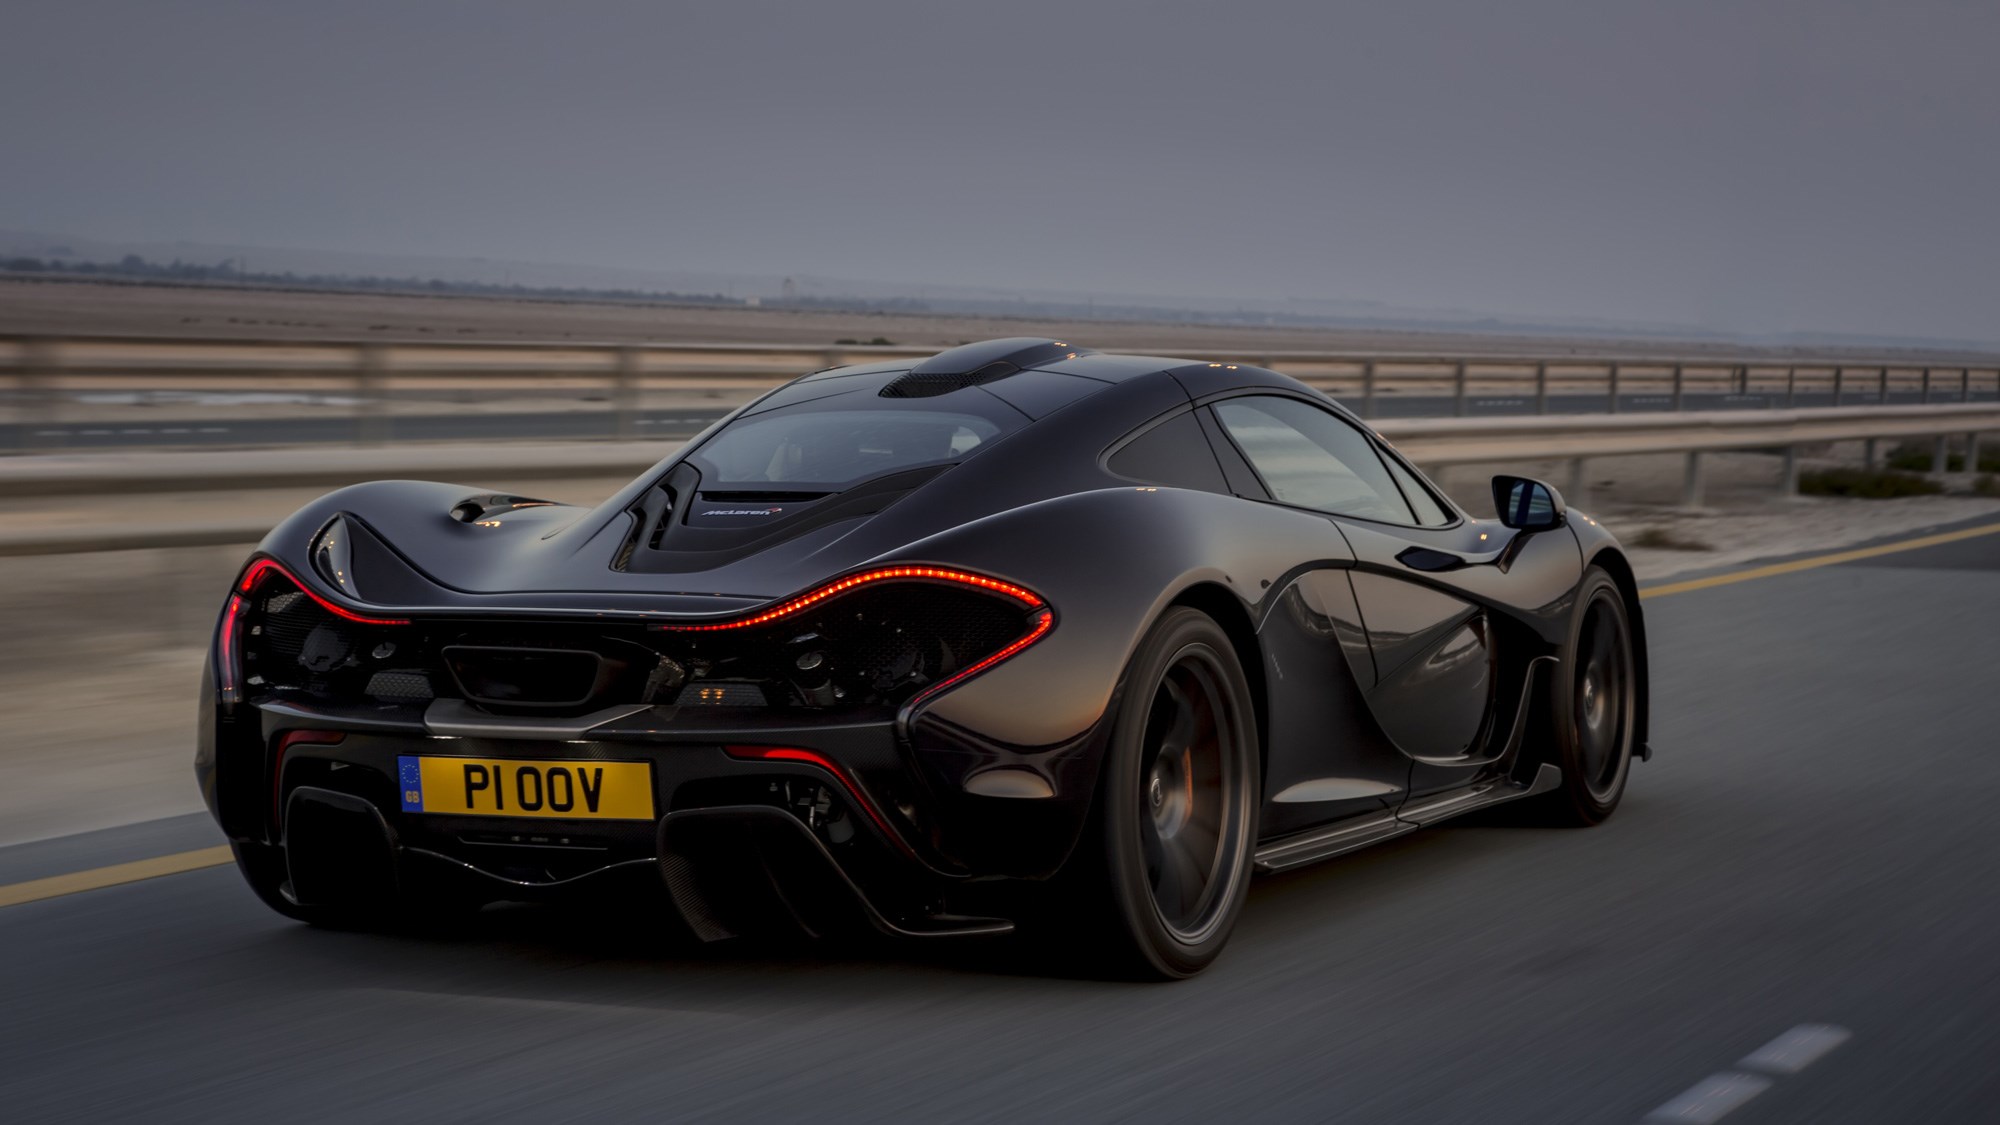 McLaren P1 review, Bahrain, black, rear view, driving on the road